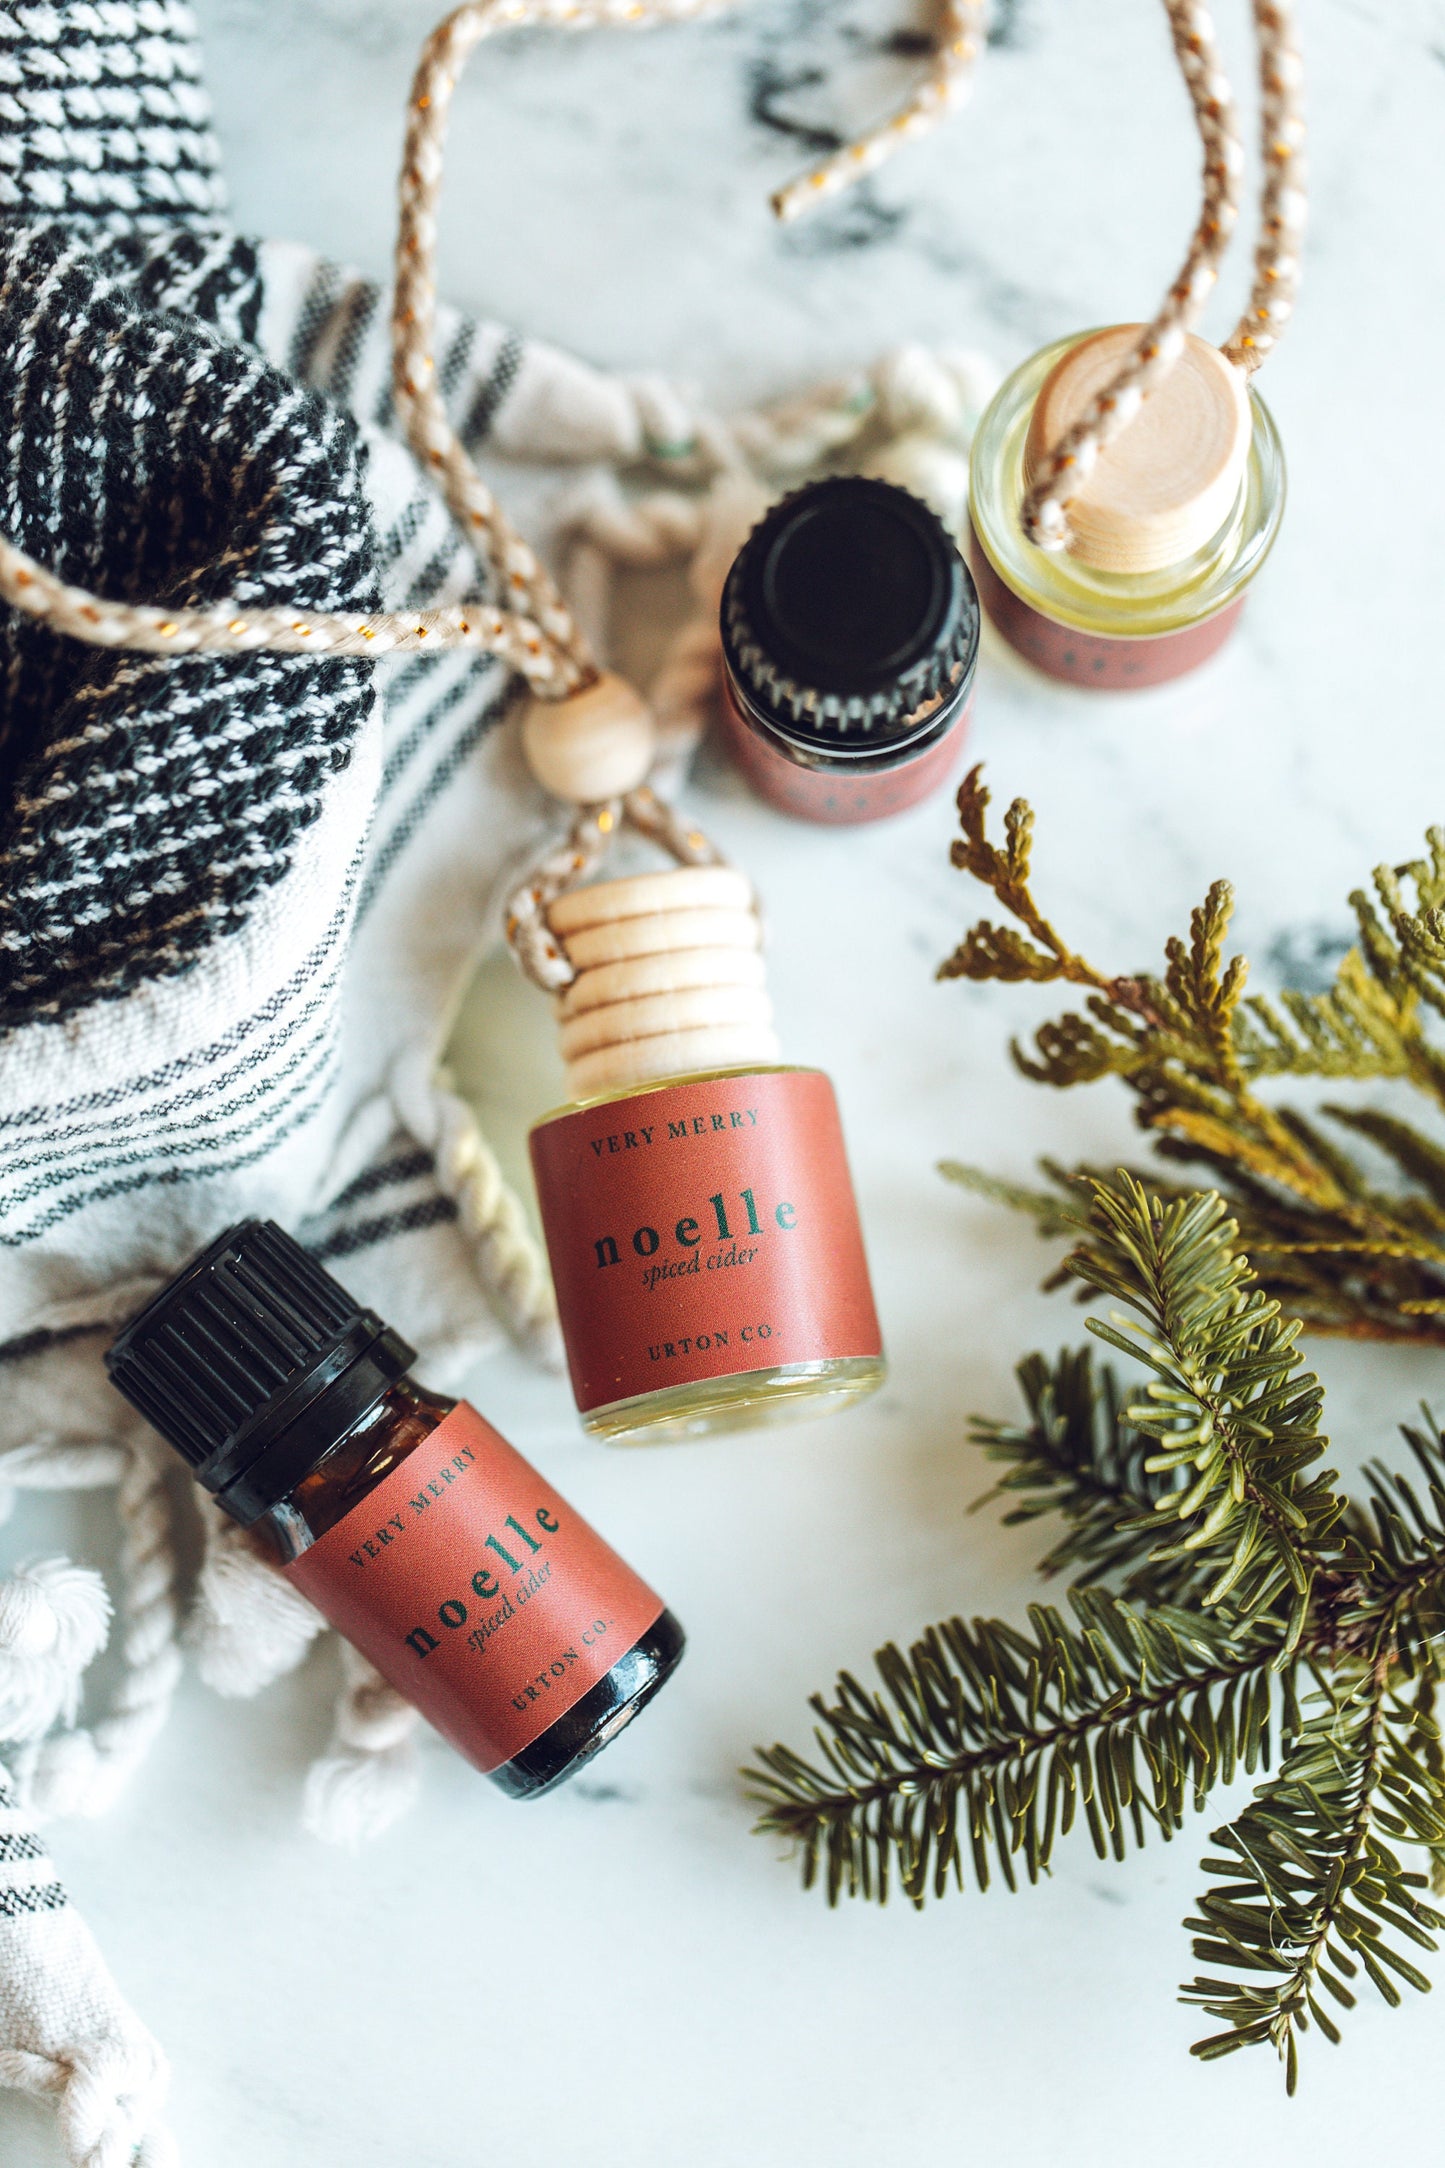 Christmas Spice Essential Oil Blend -  Simmer Pot Aromatherapy